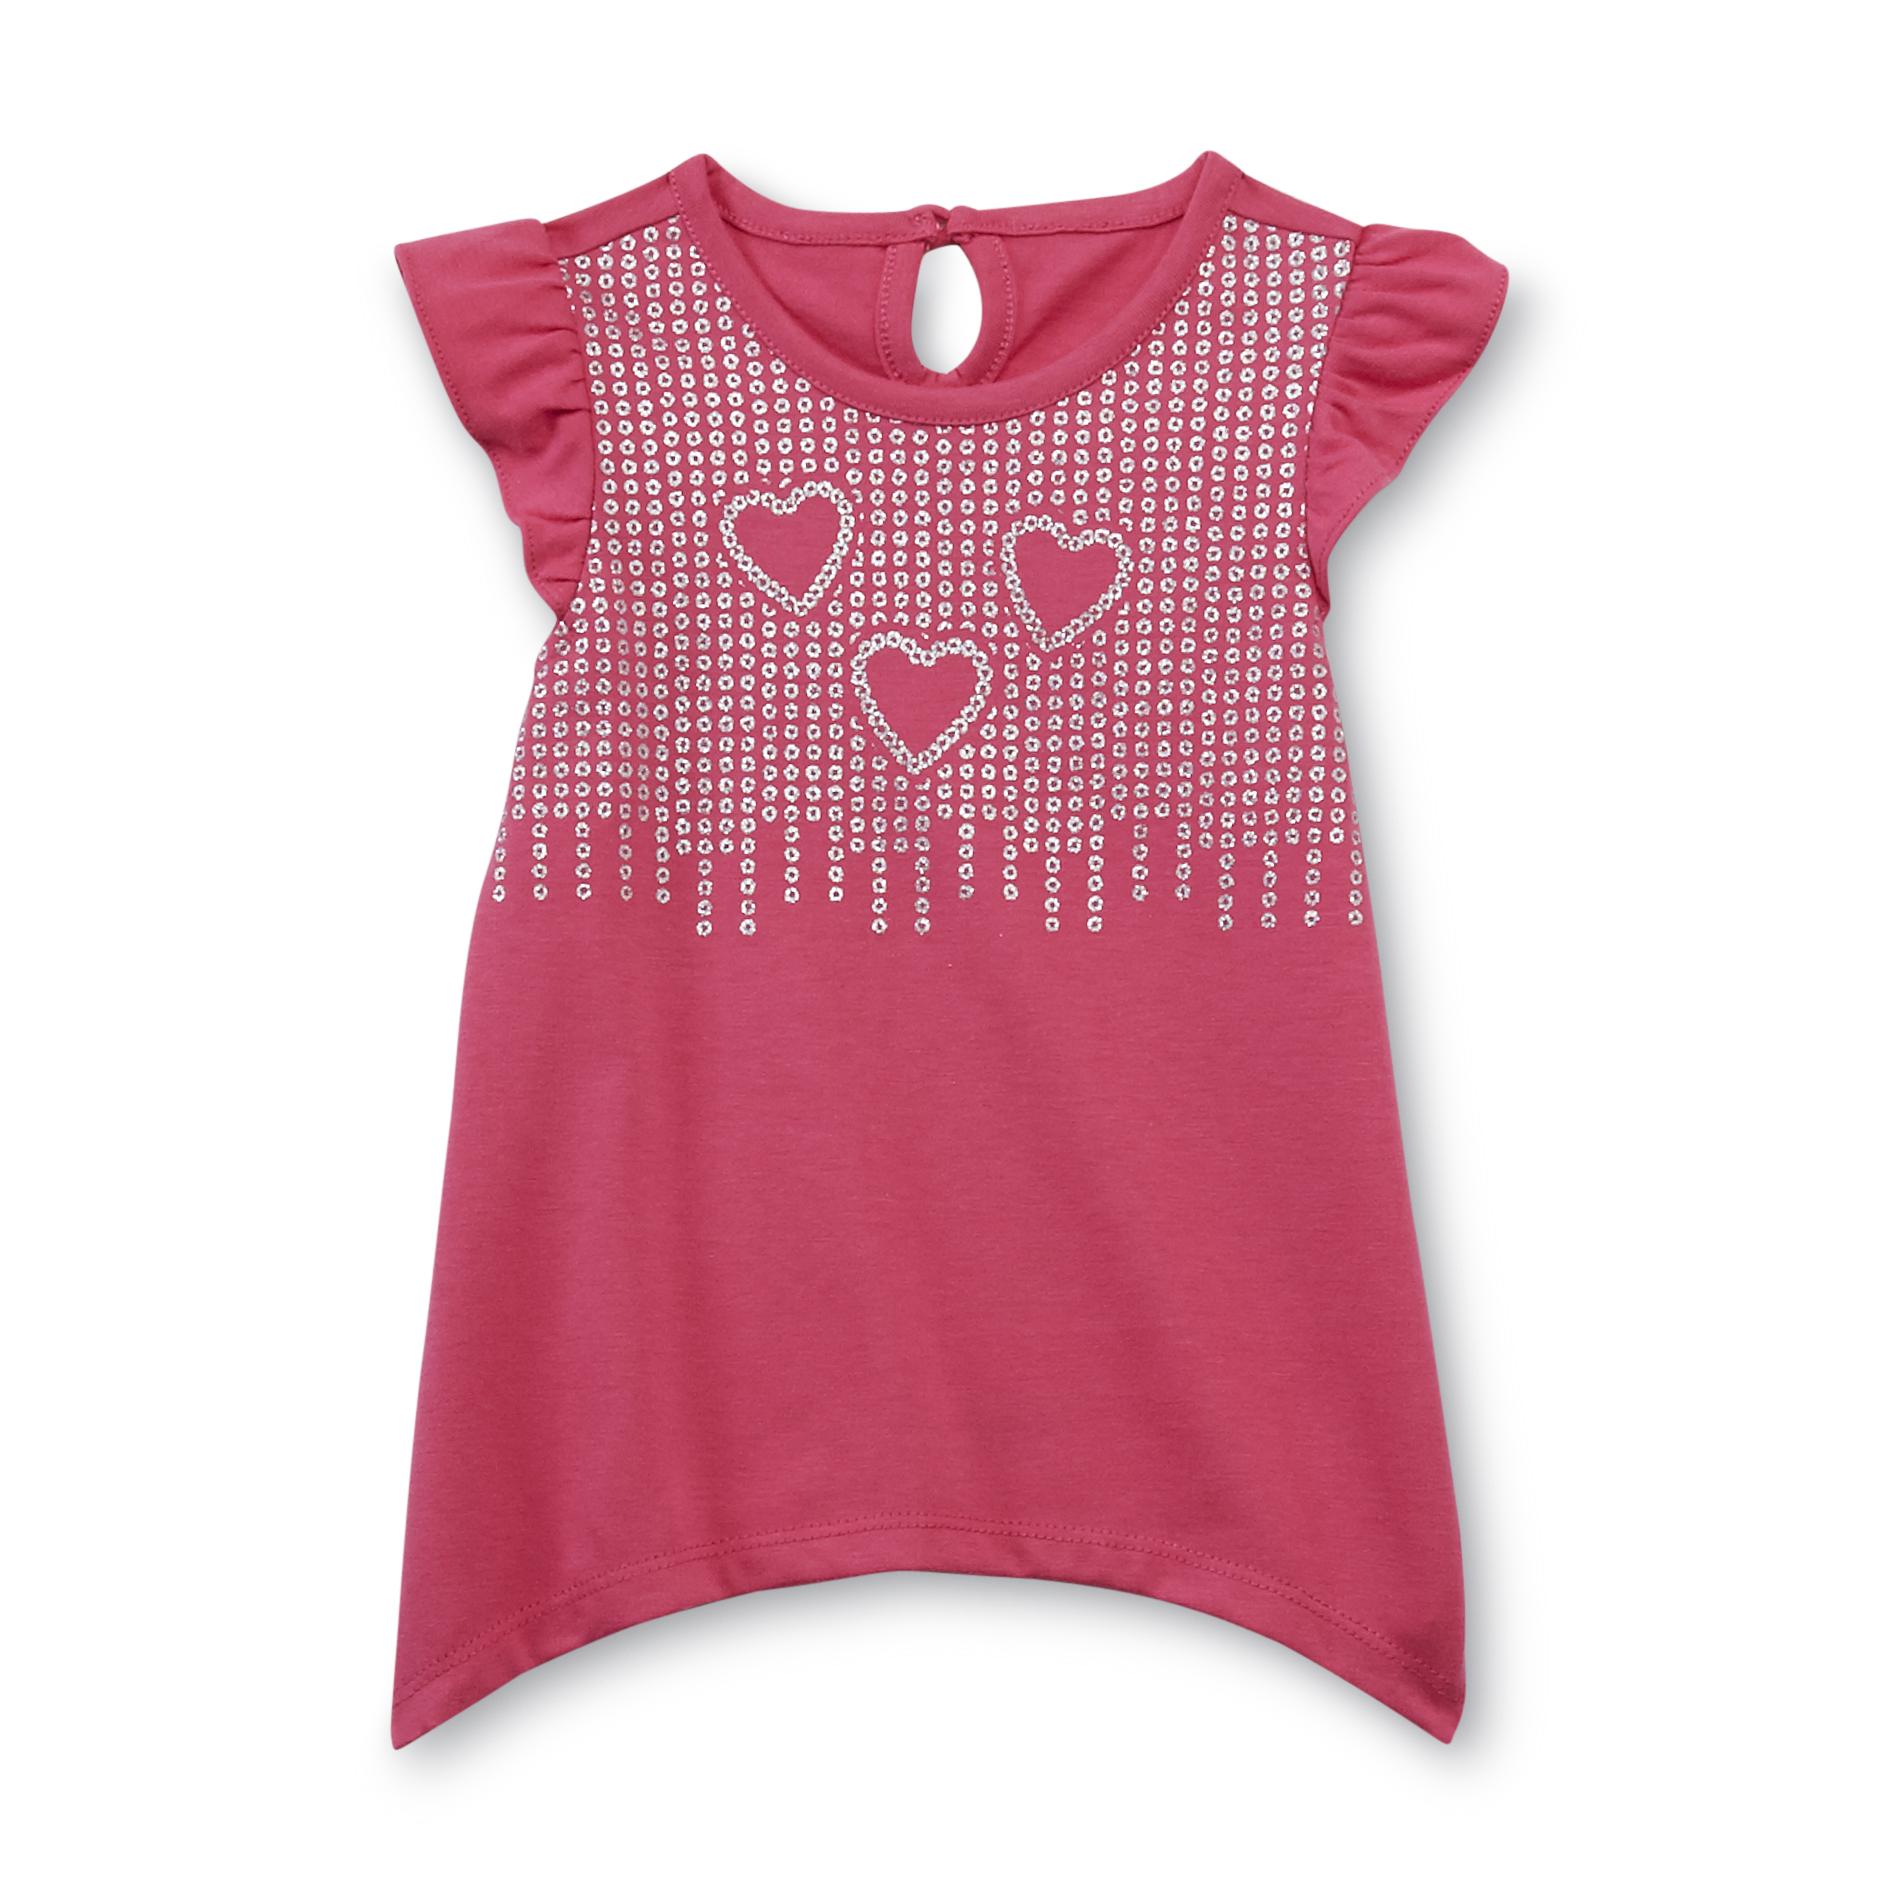 WonderKids Infant & Toddler Girl's Graphic T-Shirt - Hearts & Dots